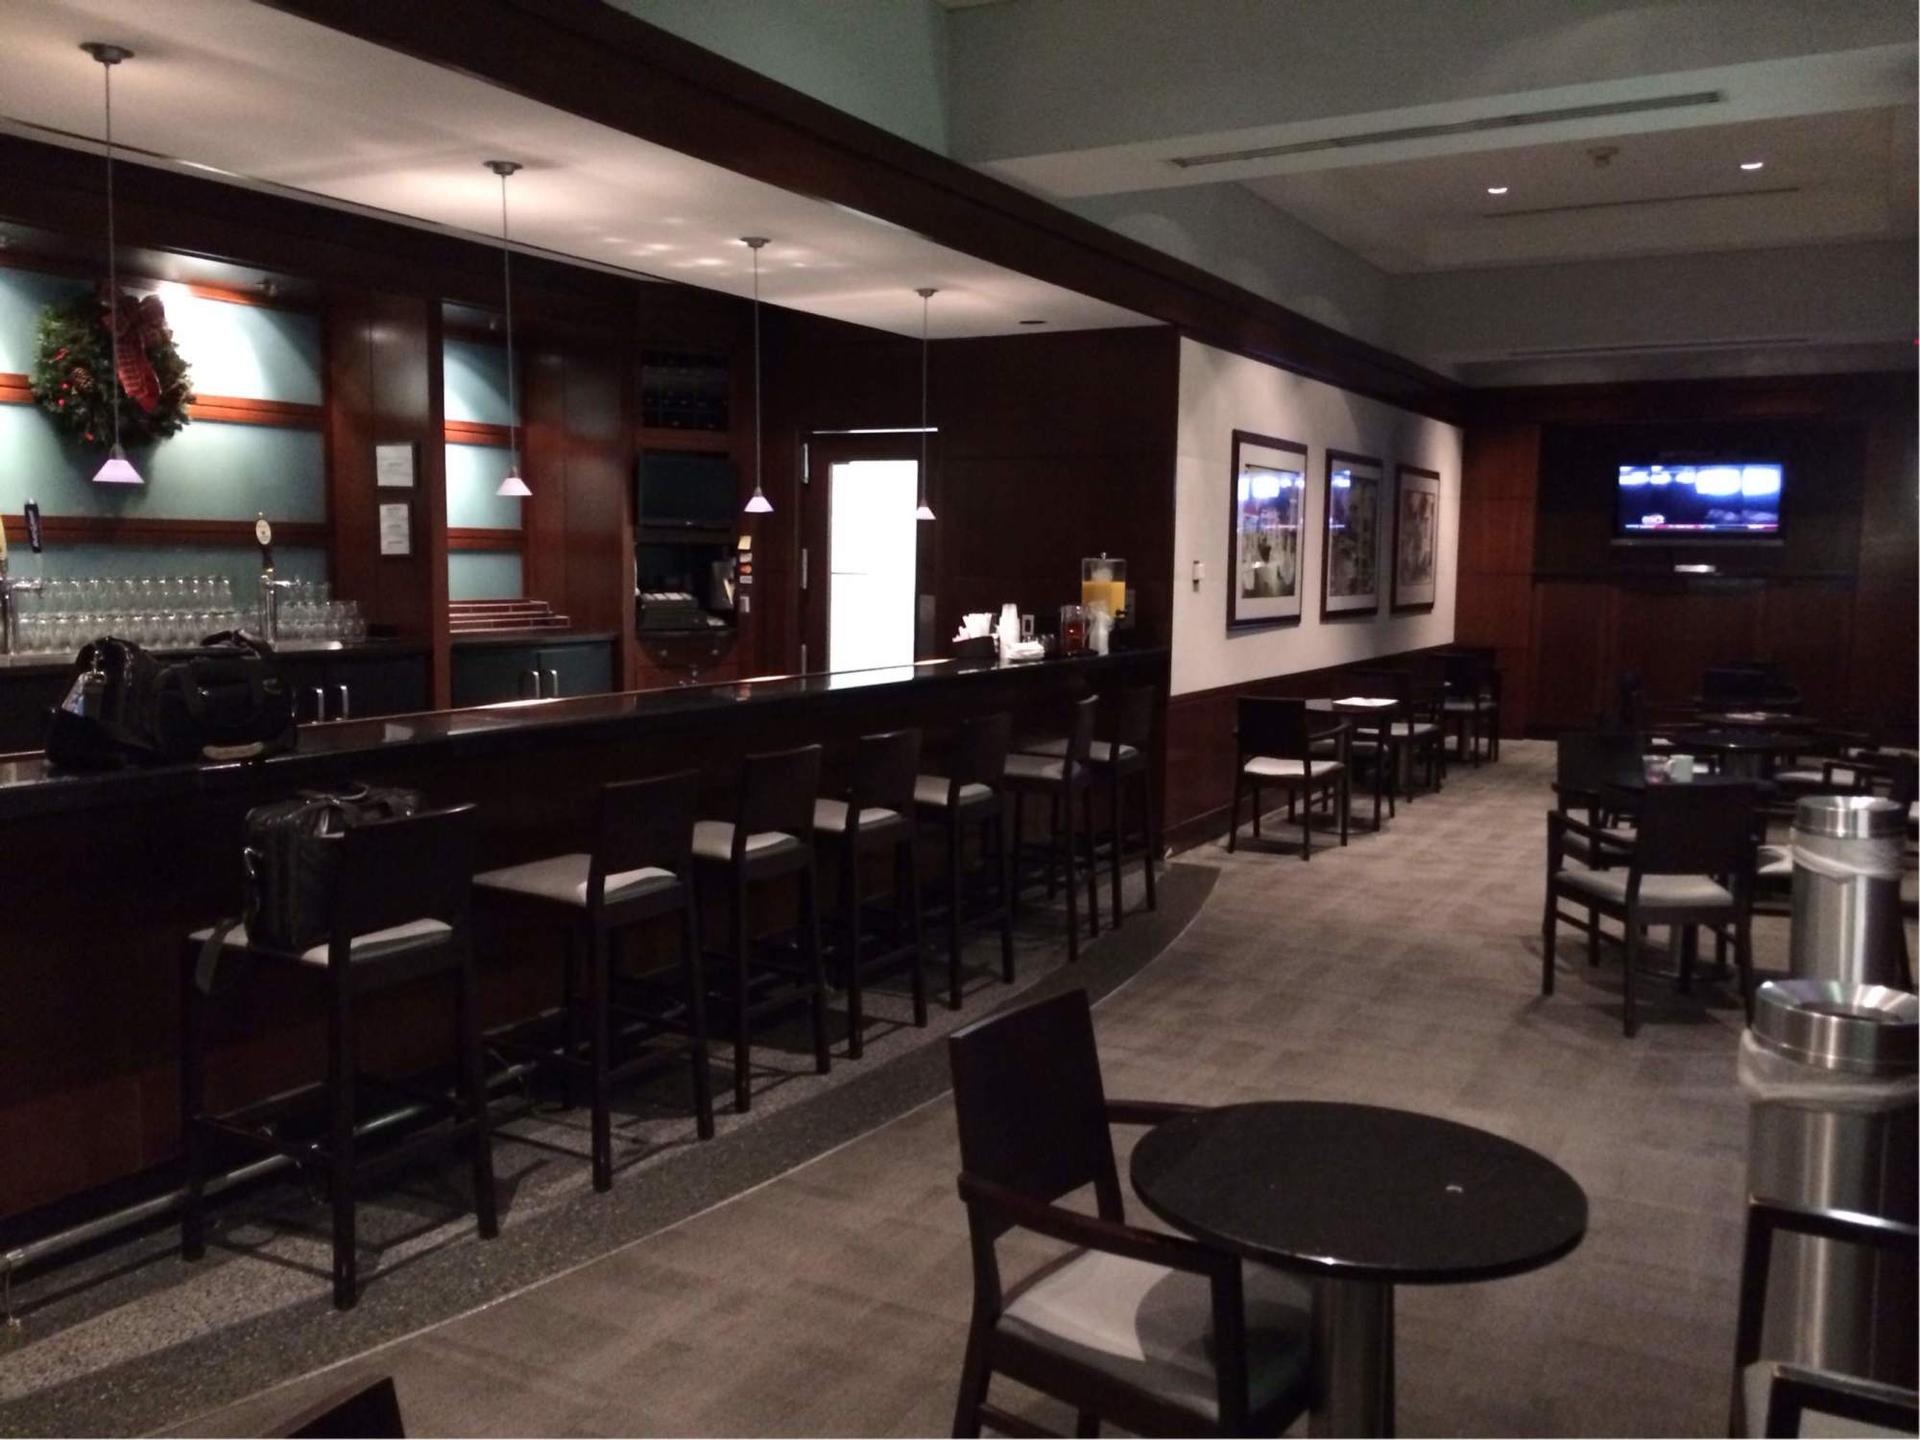 American Airlines Admirals Club image 8 of 37